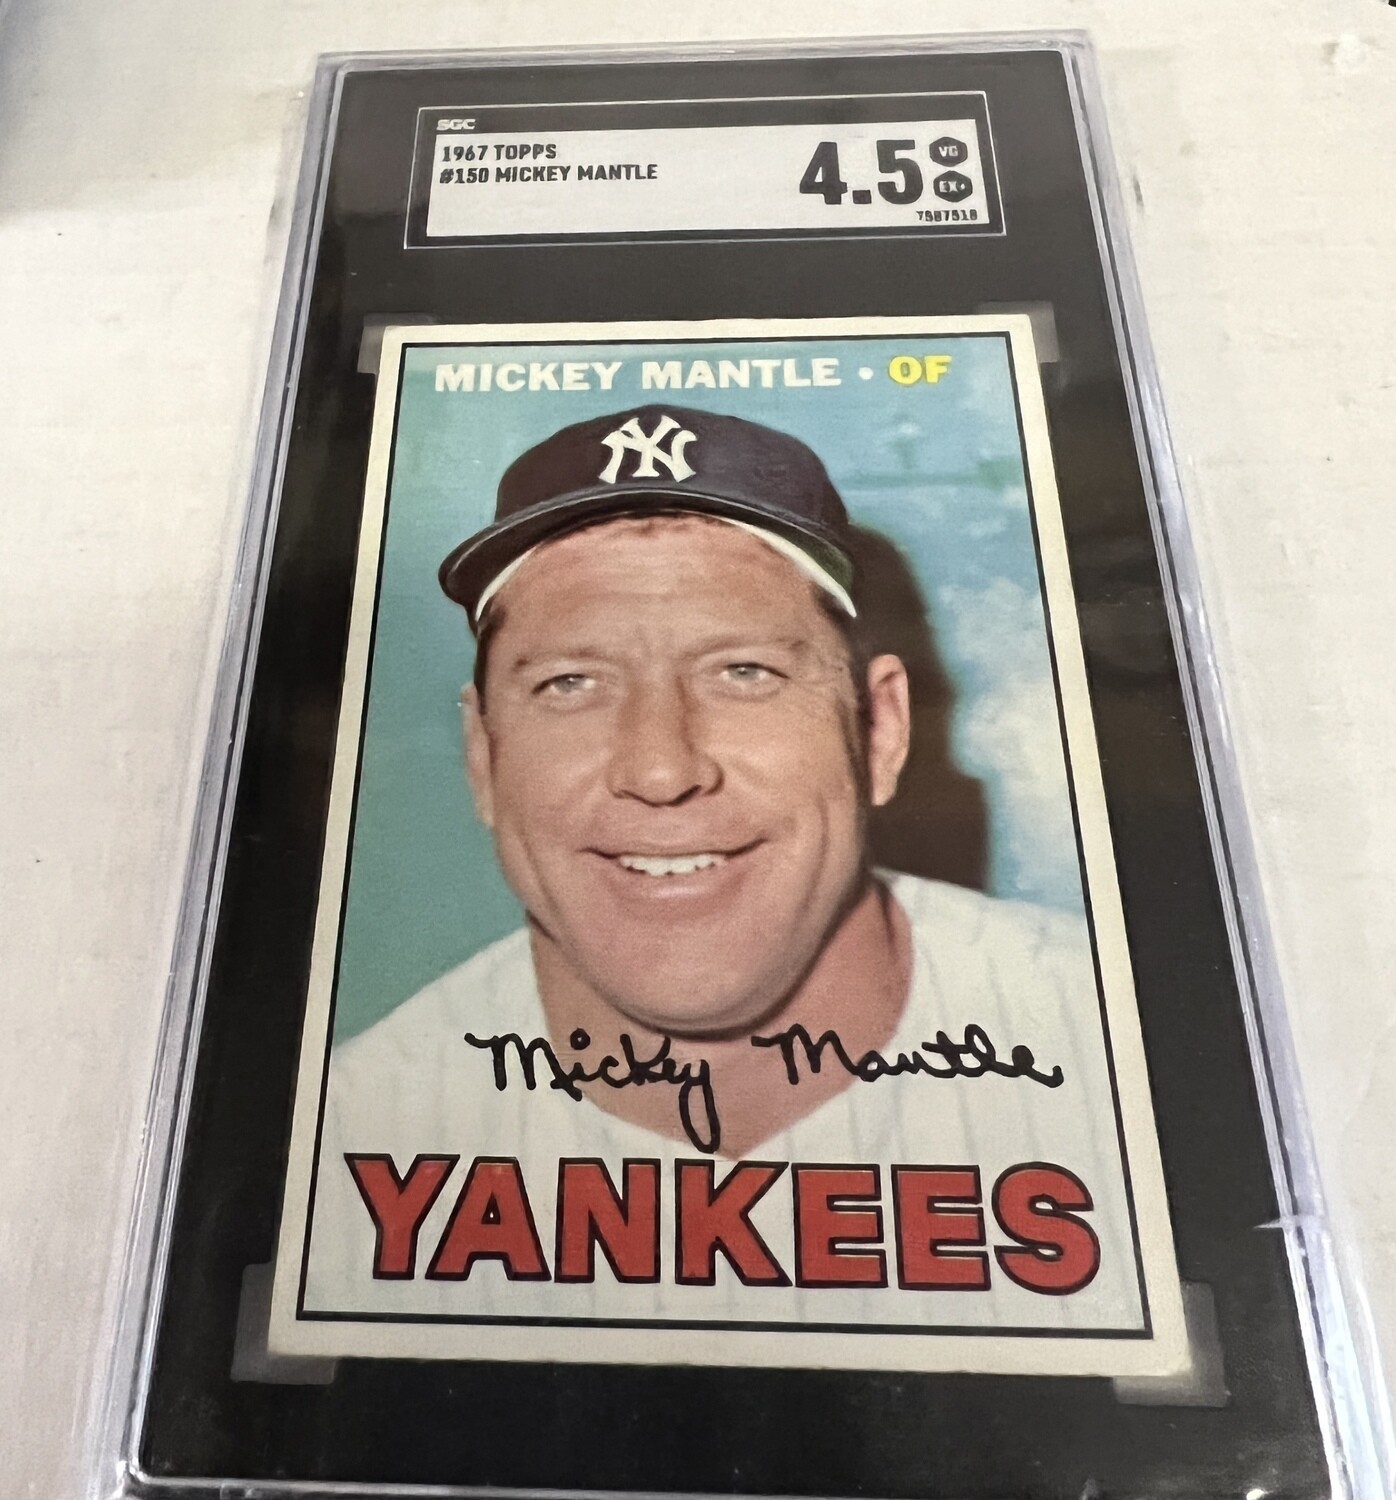 1967 Topps #150 Mickey Mantle SGC 4.5